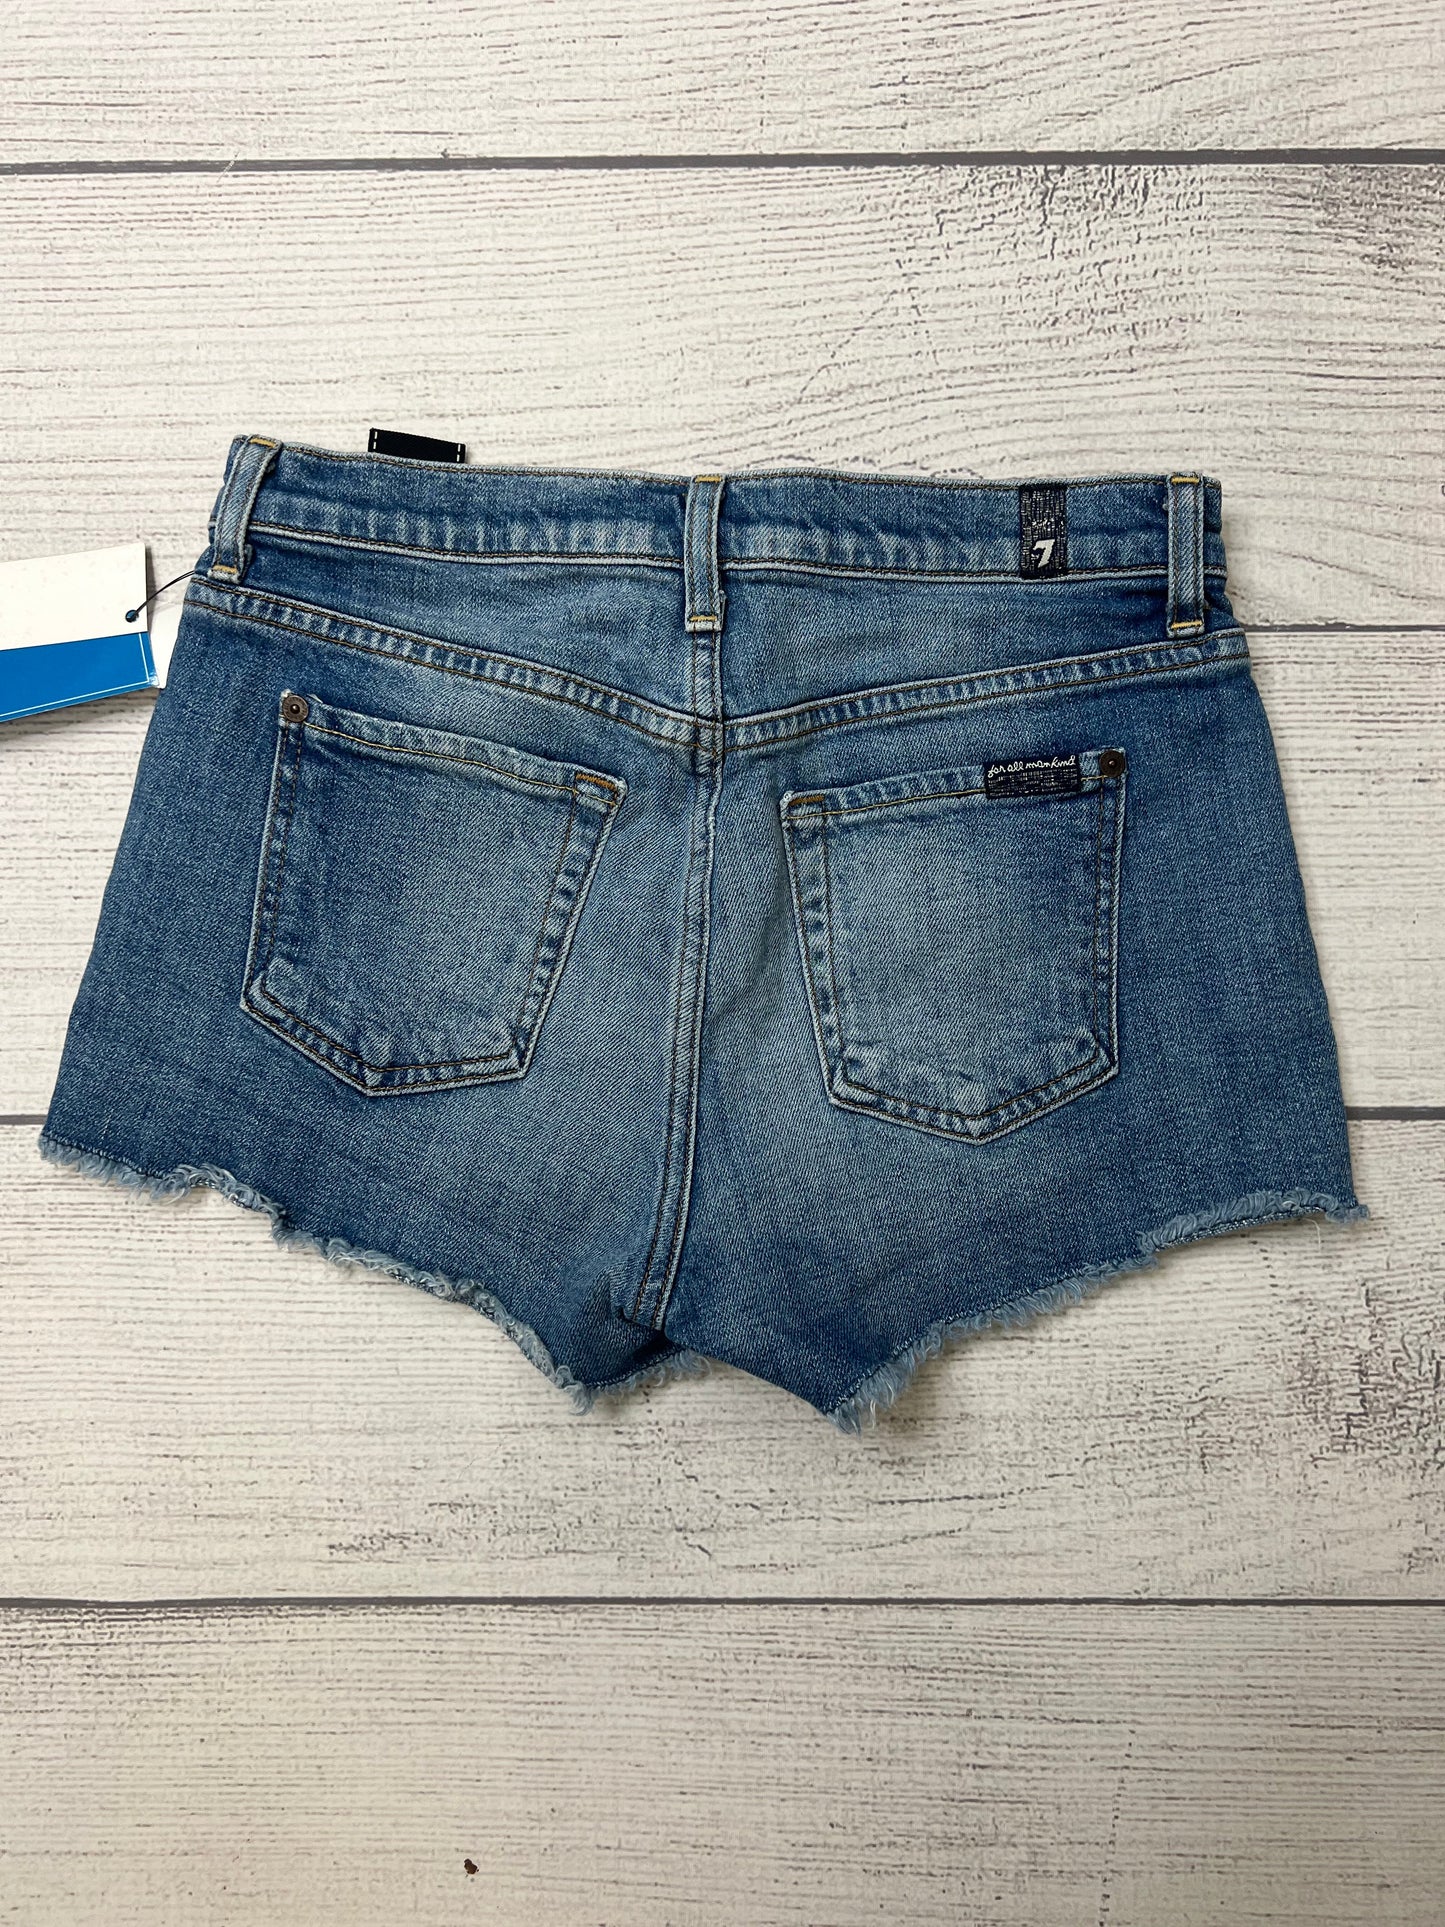 Shorts Designer By 7 For All Mankind  Size: 2